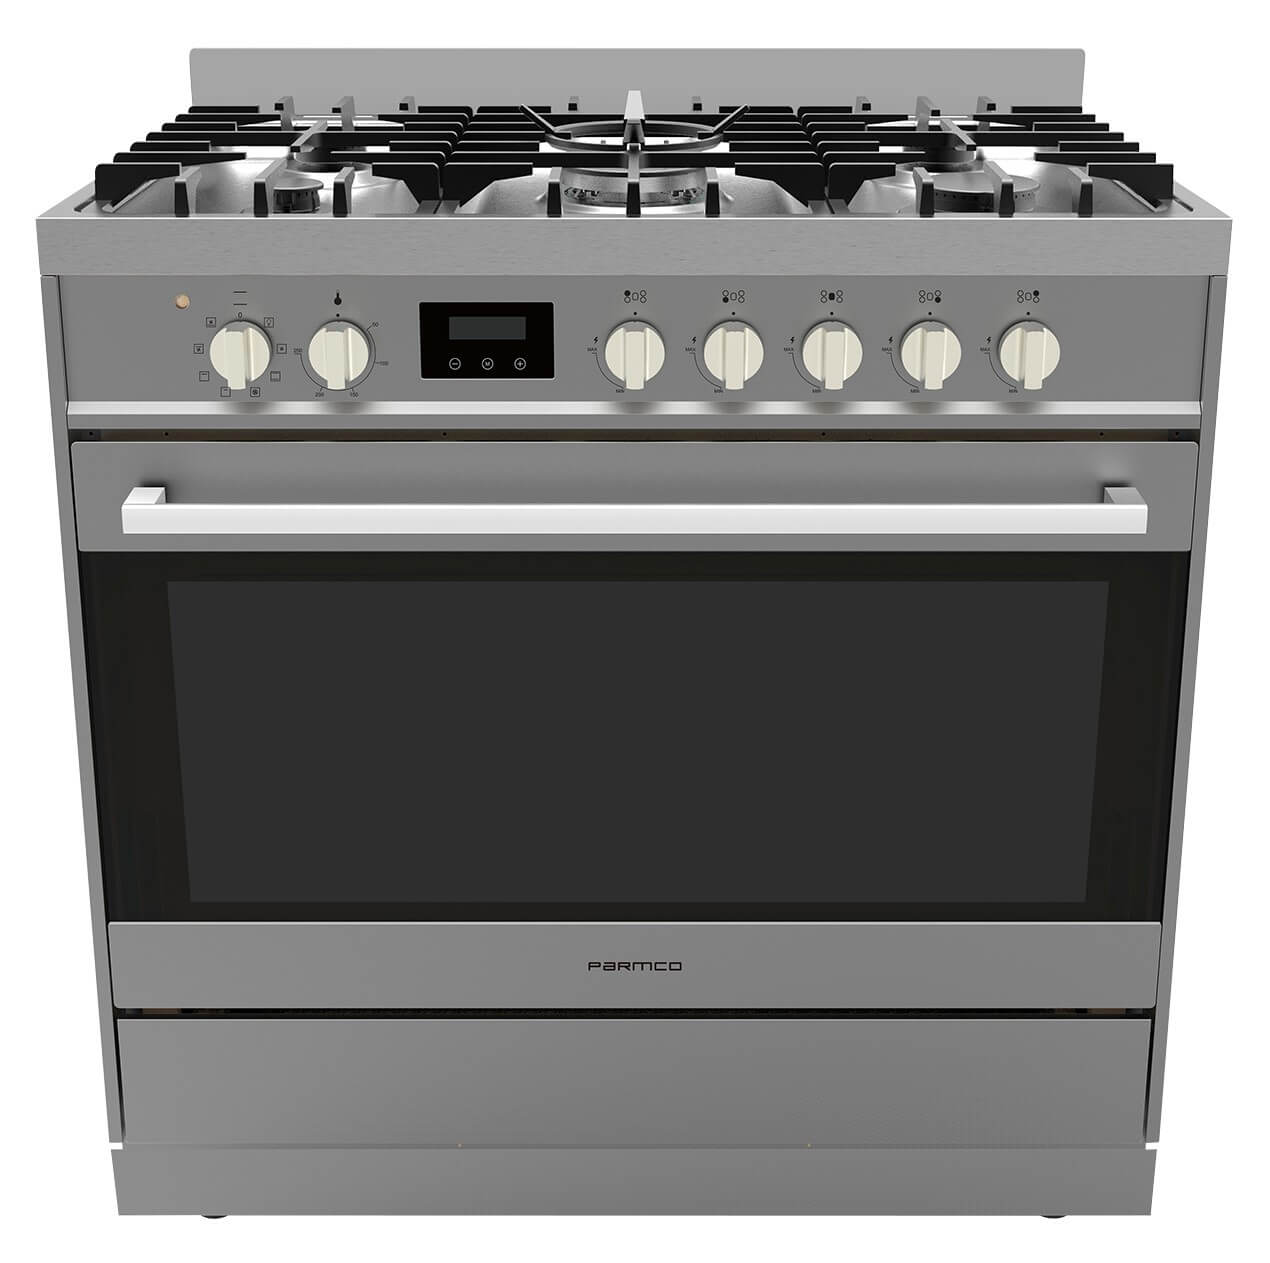 Parmco FS900SG Freestanding Gas Hobs with Electric Oven